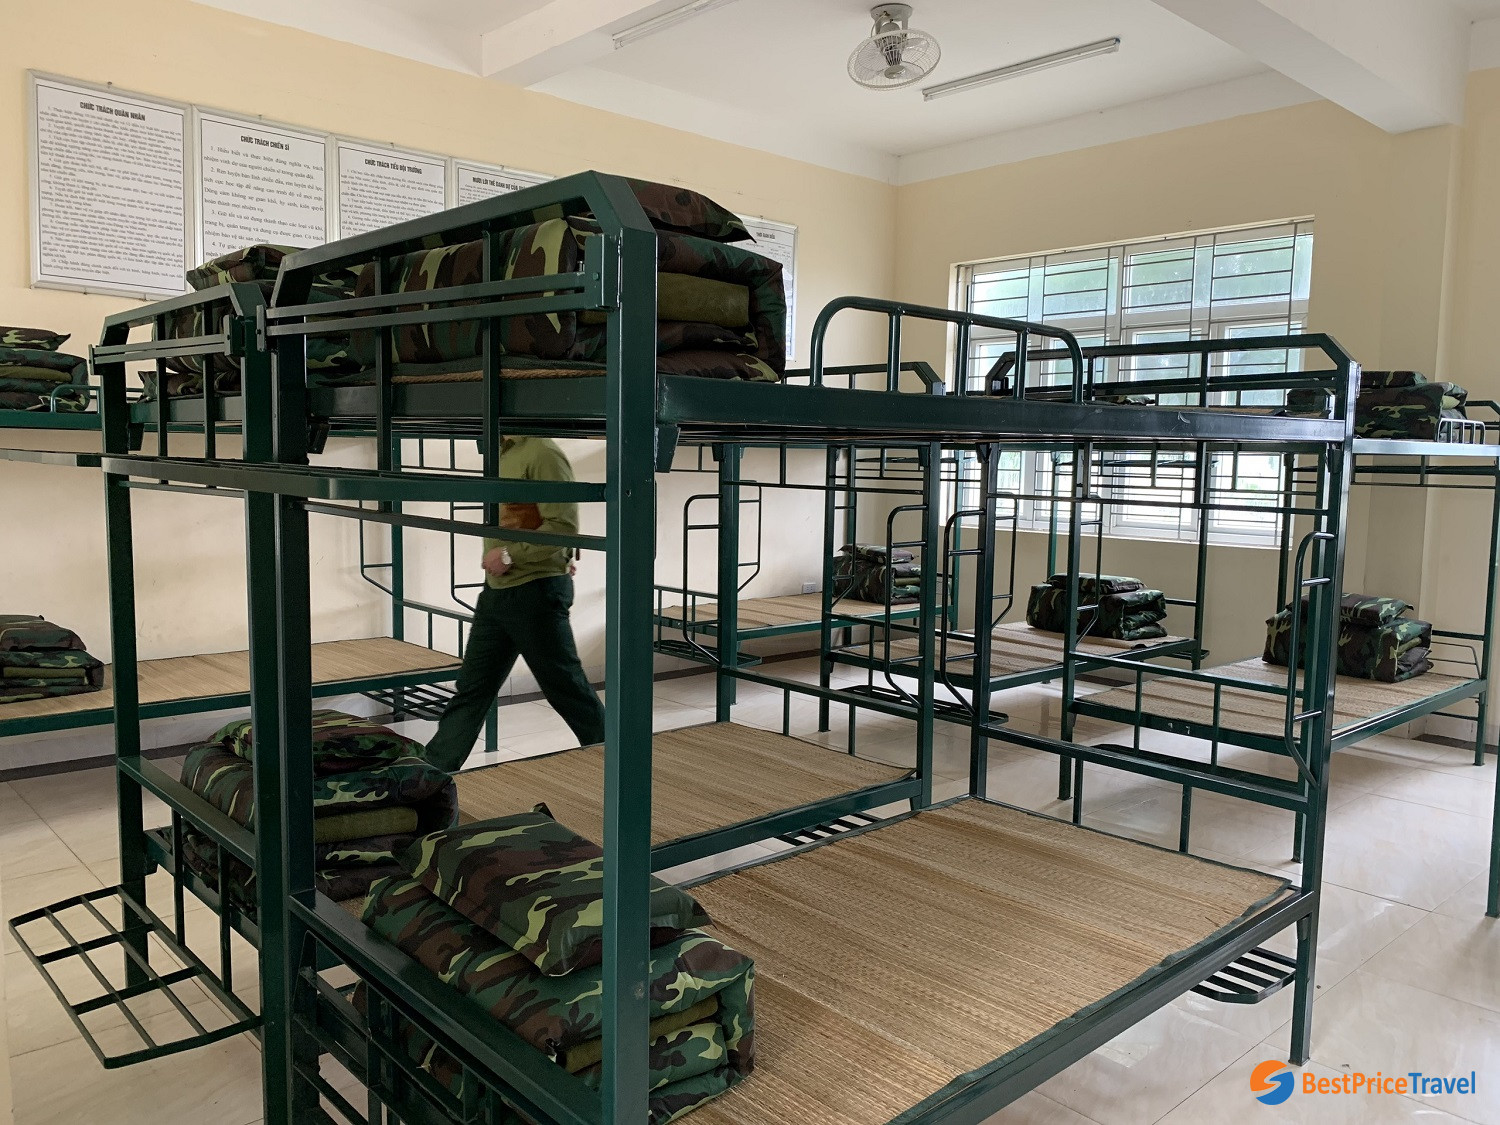 shared room in military barrack's isolation region